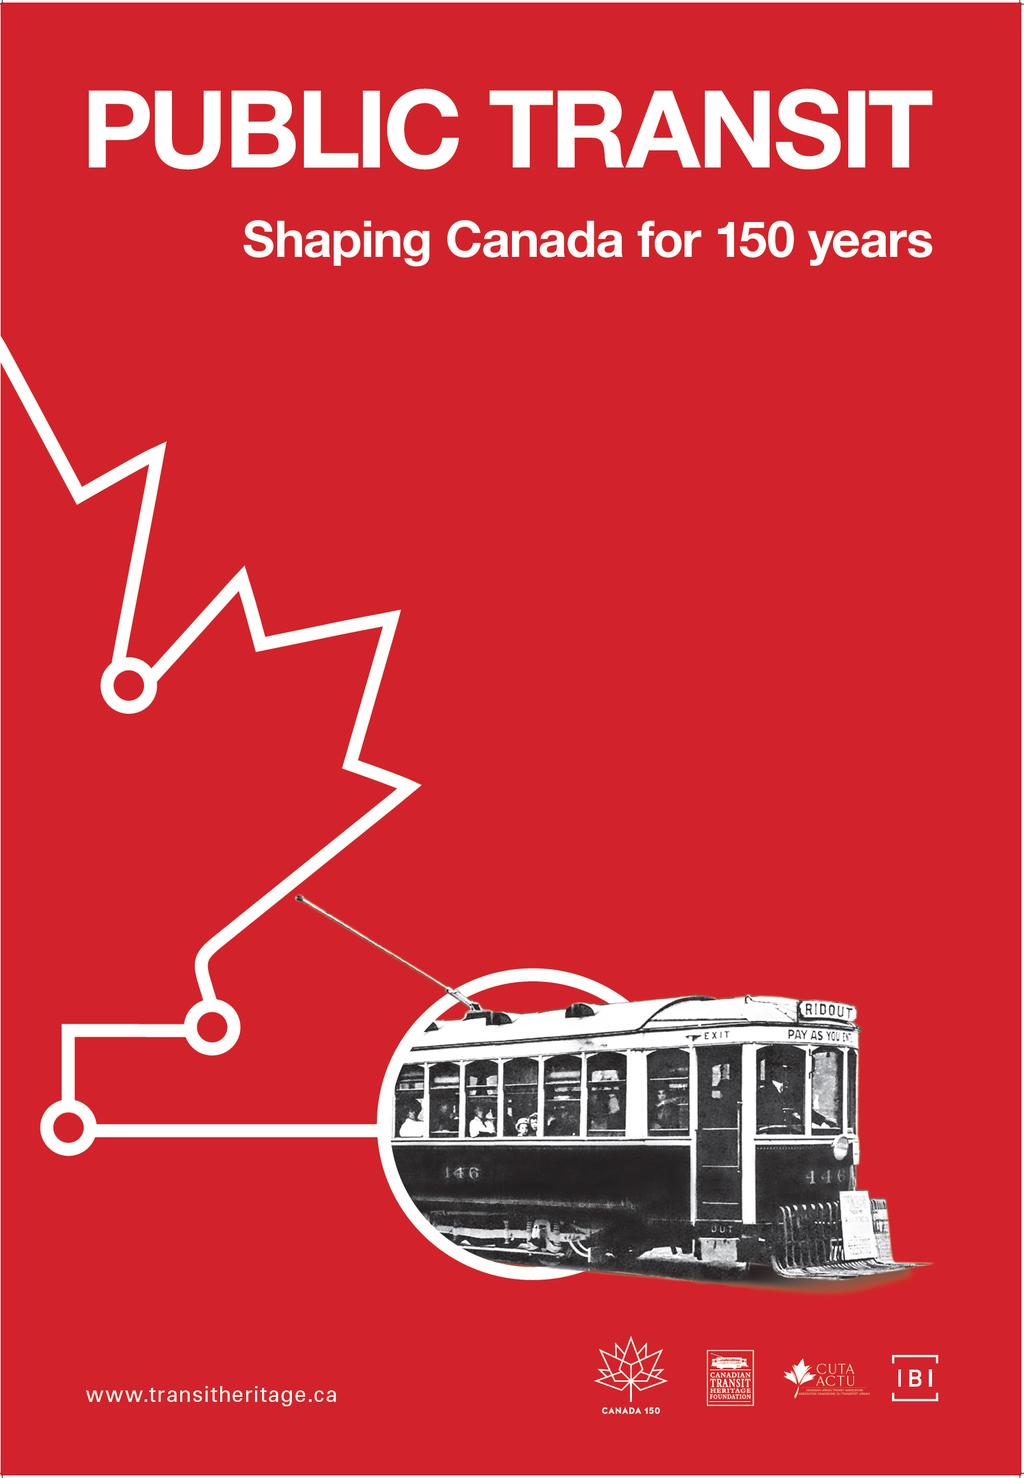 + FUN FACTS Canada s first scheduled public transit service, the Halifax-Dartmouth ferry, began in 1752, over 100 years before Confederation.